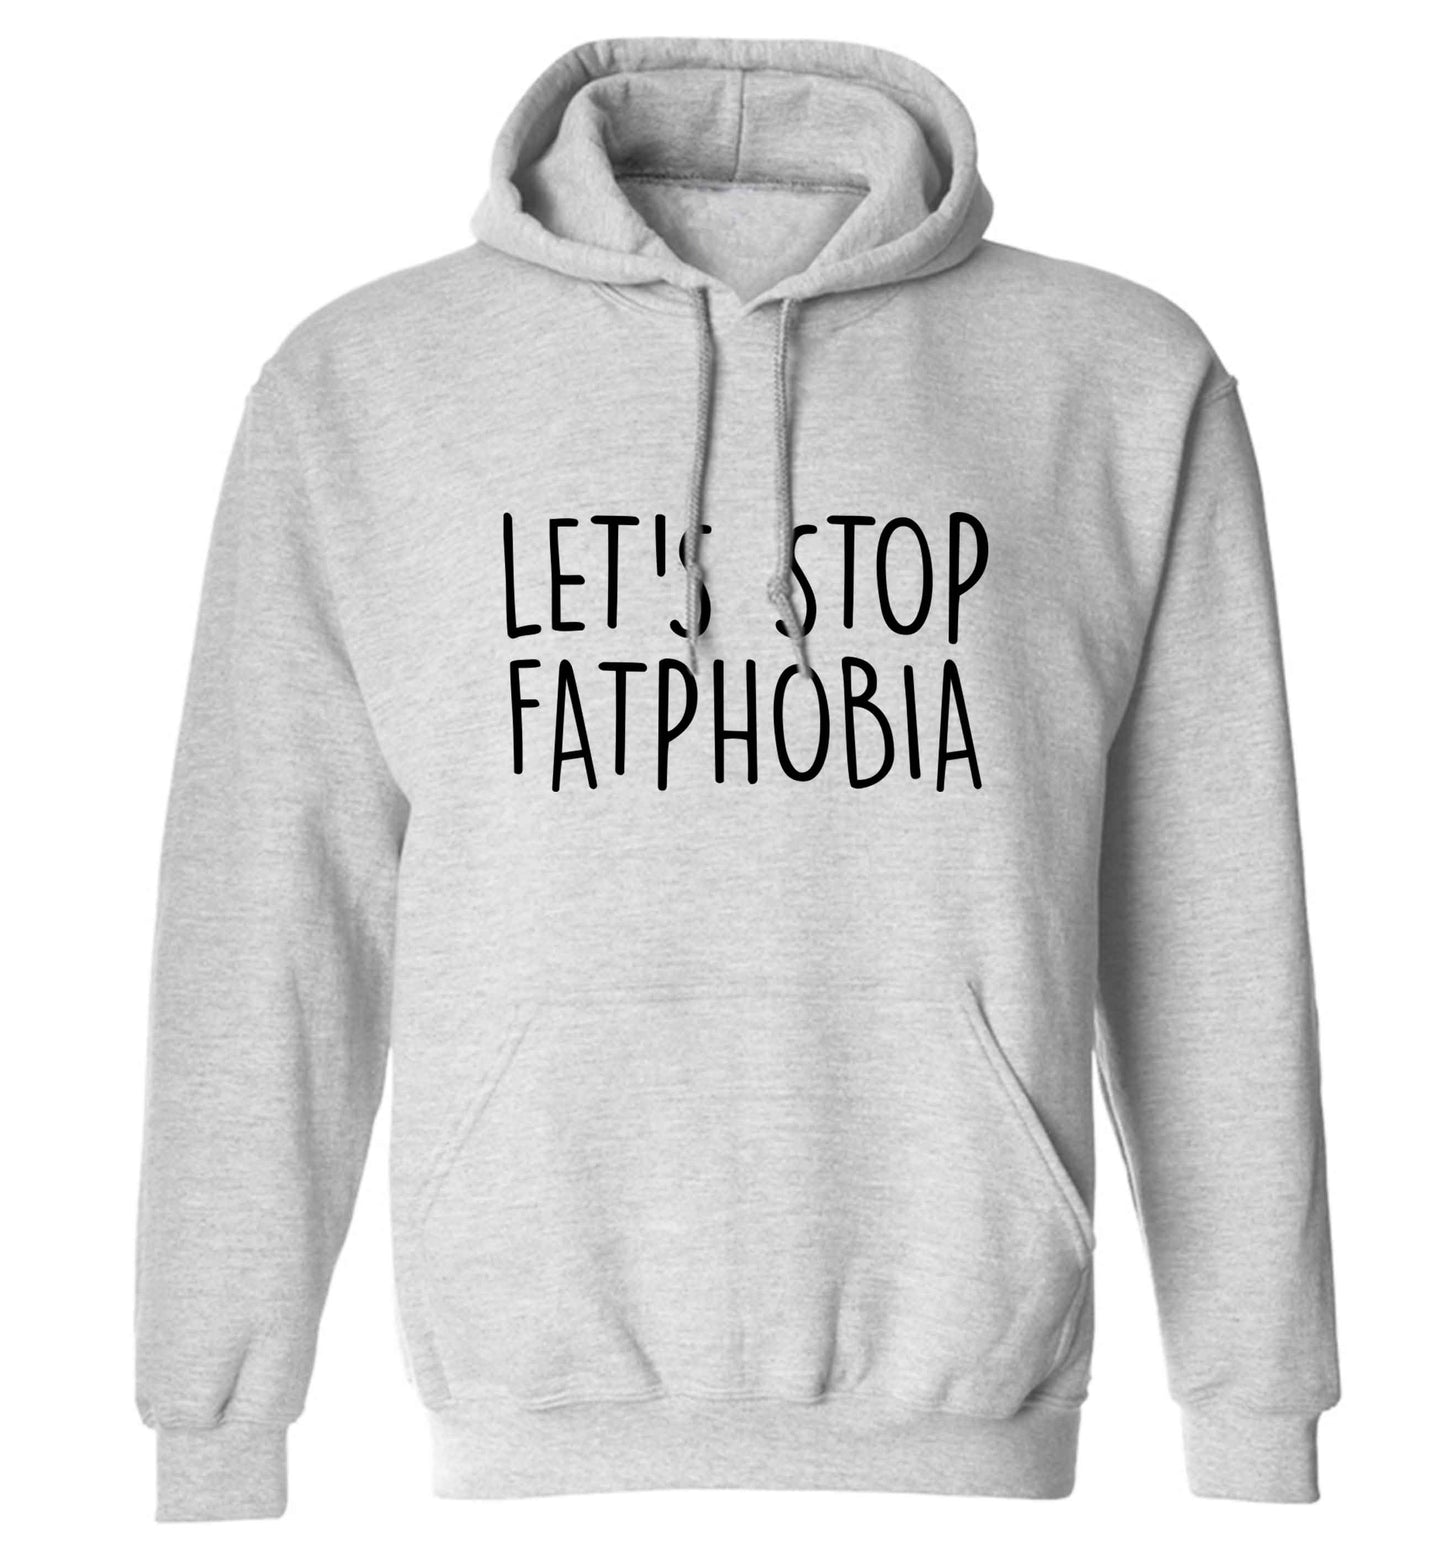 Let's stop fatphobia adults unisex grey hoodie 2XL